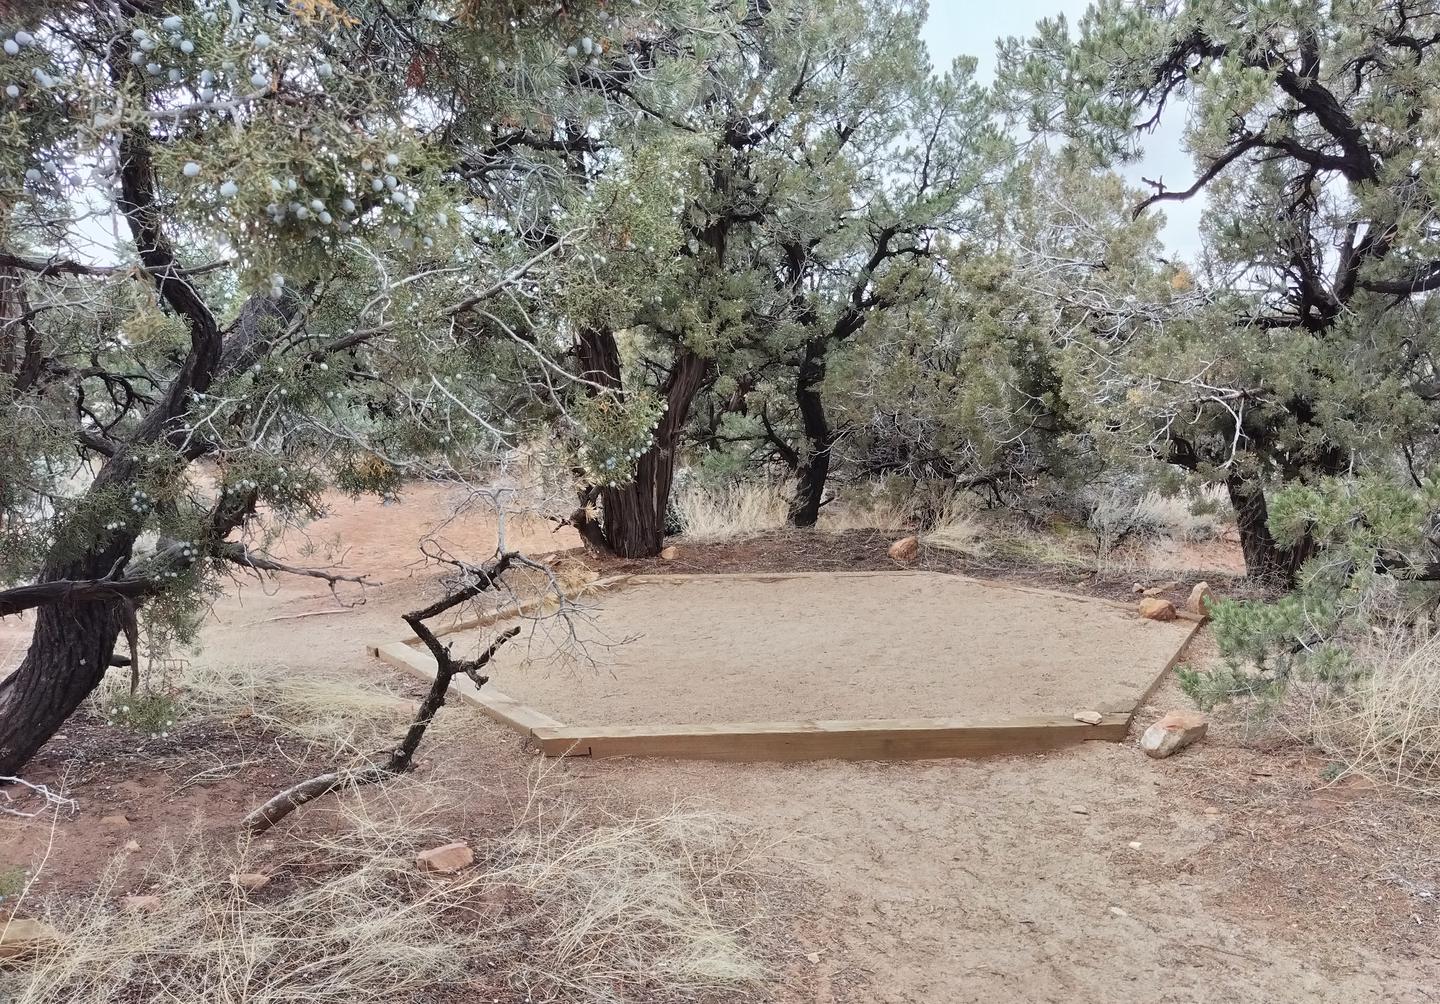 A small tent pad surrounded by treesSite 3 has a tent pad, picnic table, and a metal fire ring. The site is surrounded by pinon-juniper forest.